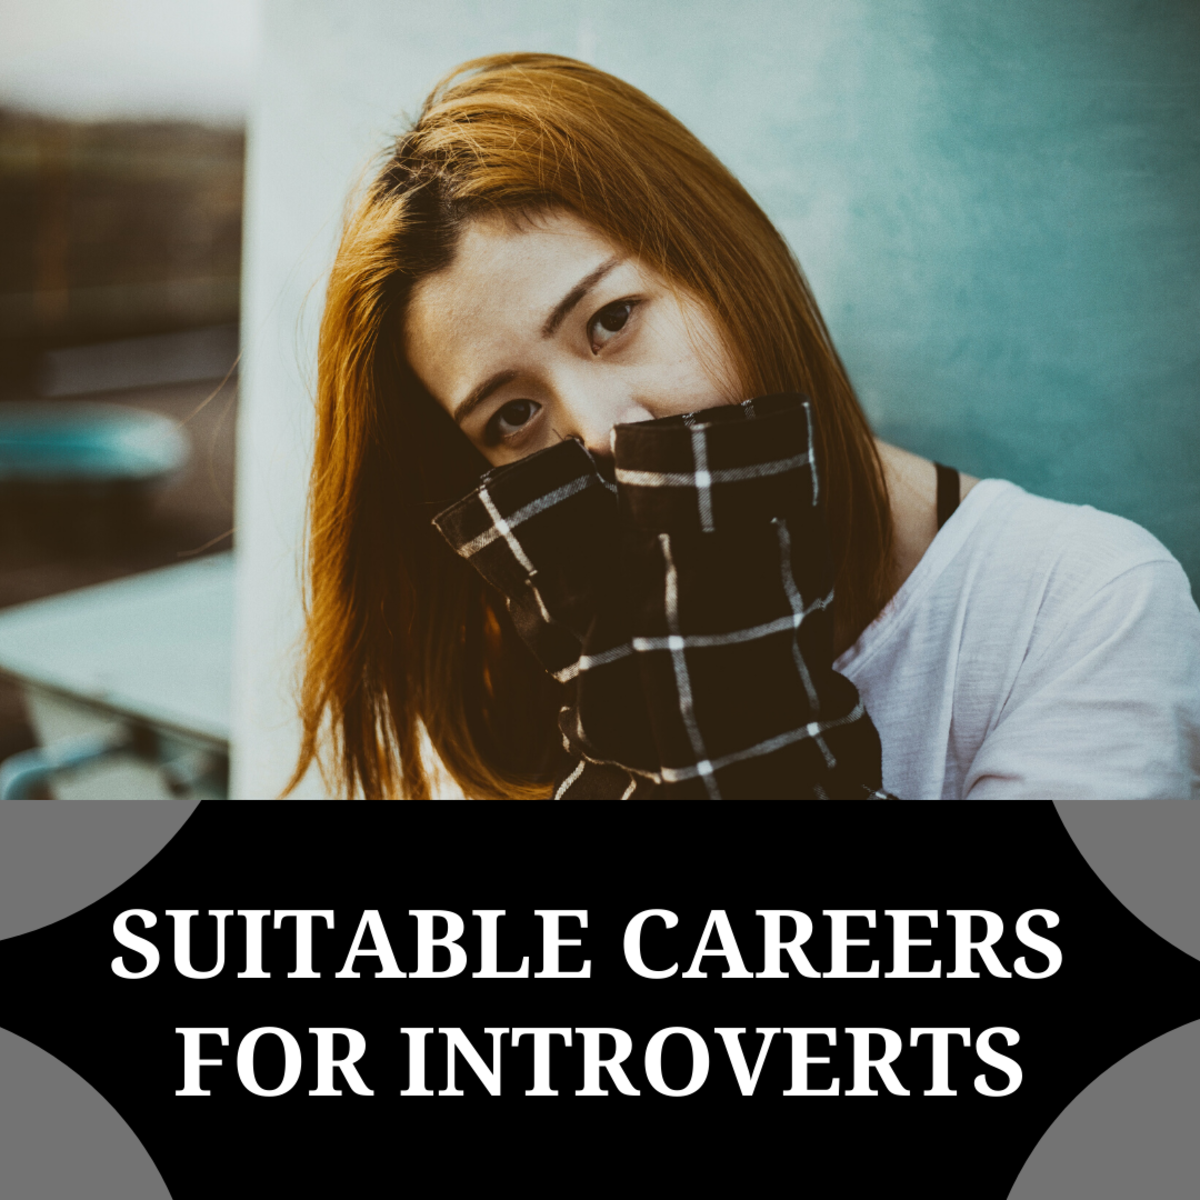 Best Jobs for Introverts: Find Your Fit